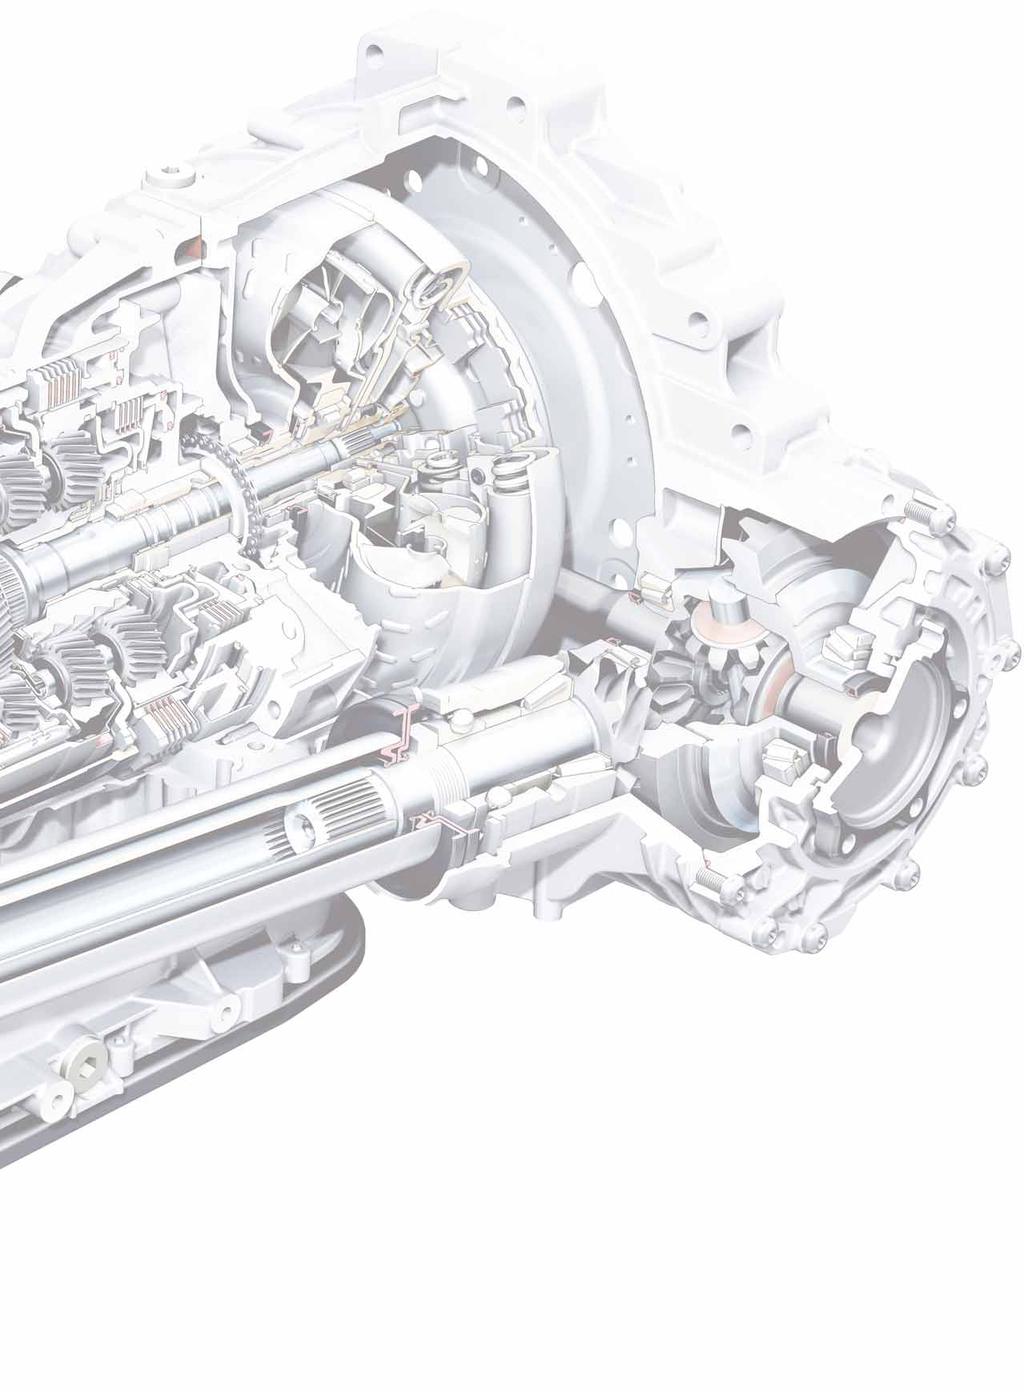 The higher fuel efficiency of the 8HP automatic gearbox generation is due to the following modifications: a wider ratio spread and more gears for better adaptation to ideal engine operating points